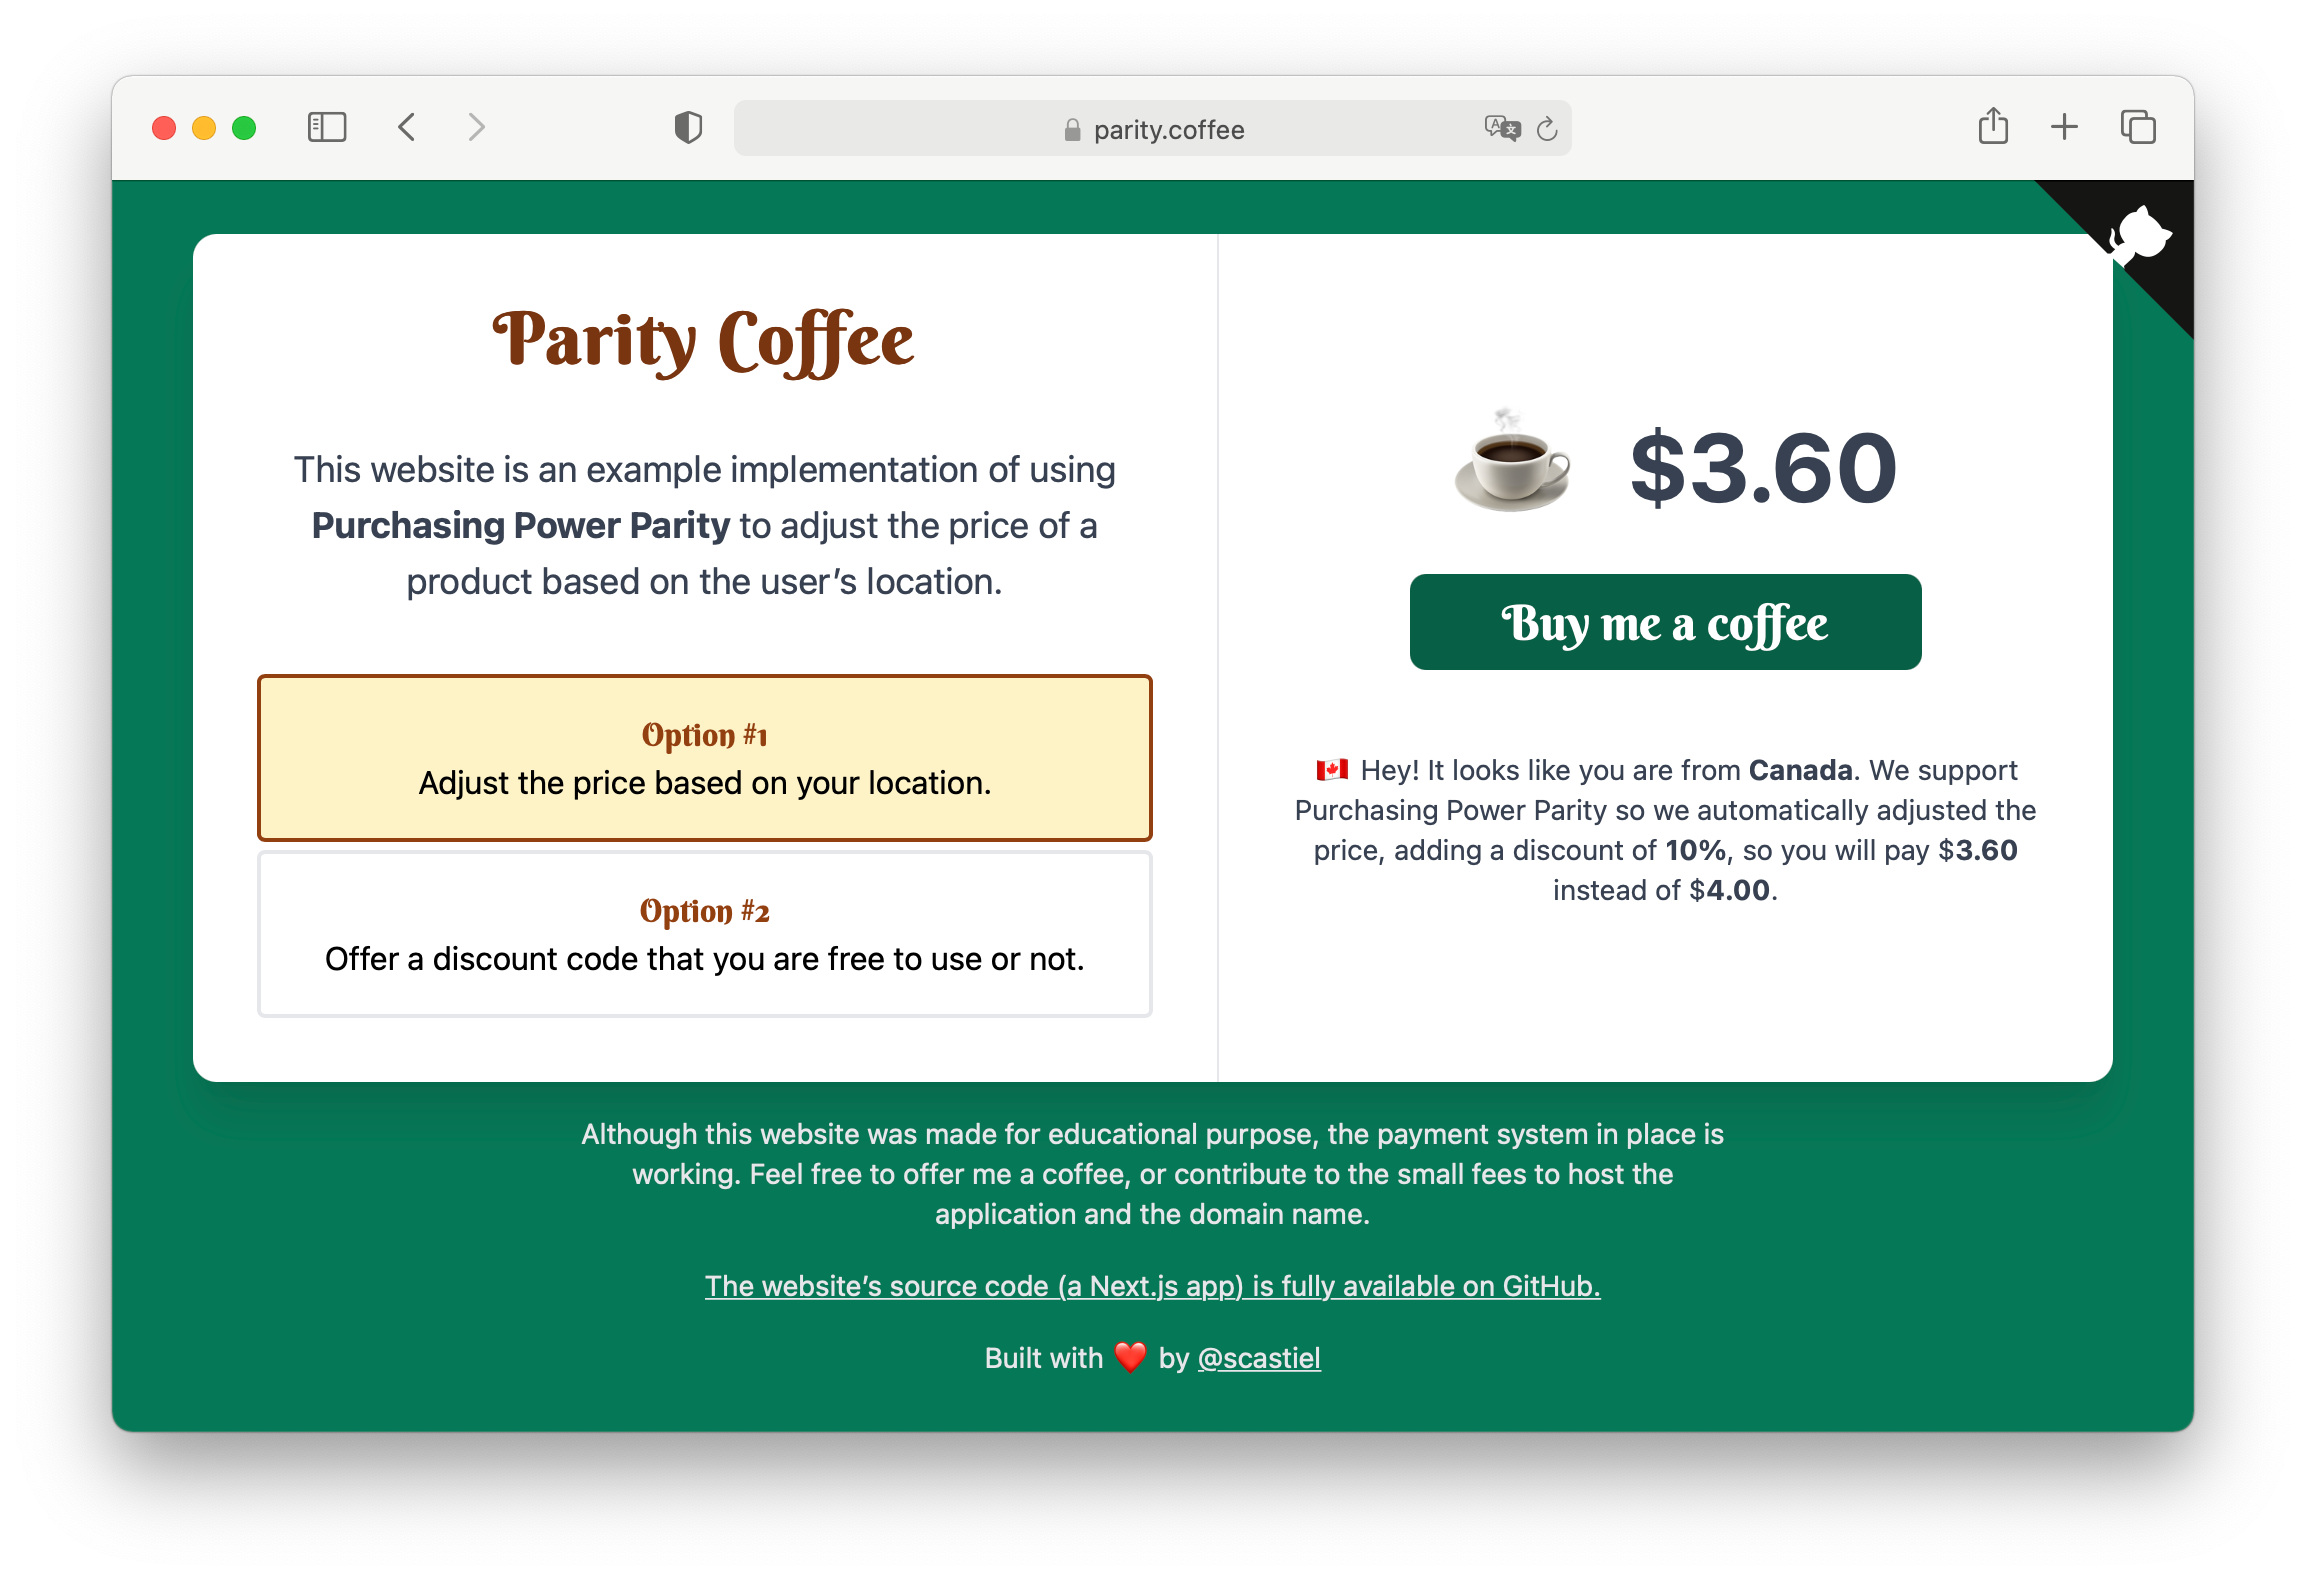 parity.coffee: a demo site using PPP